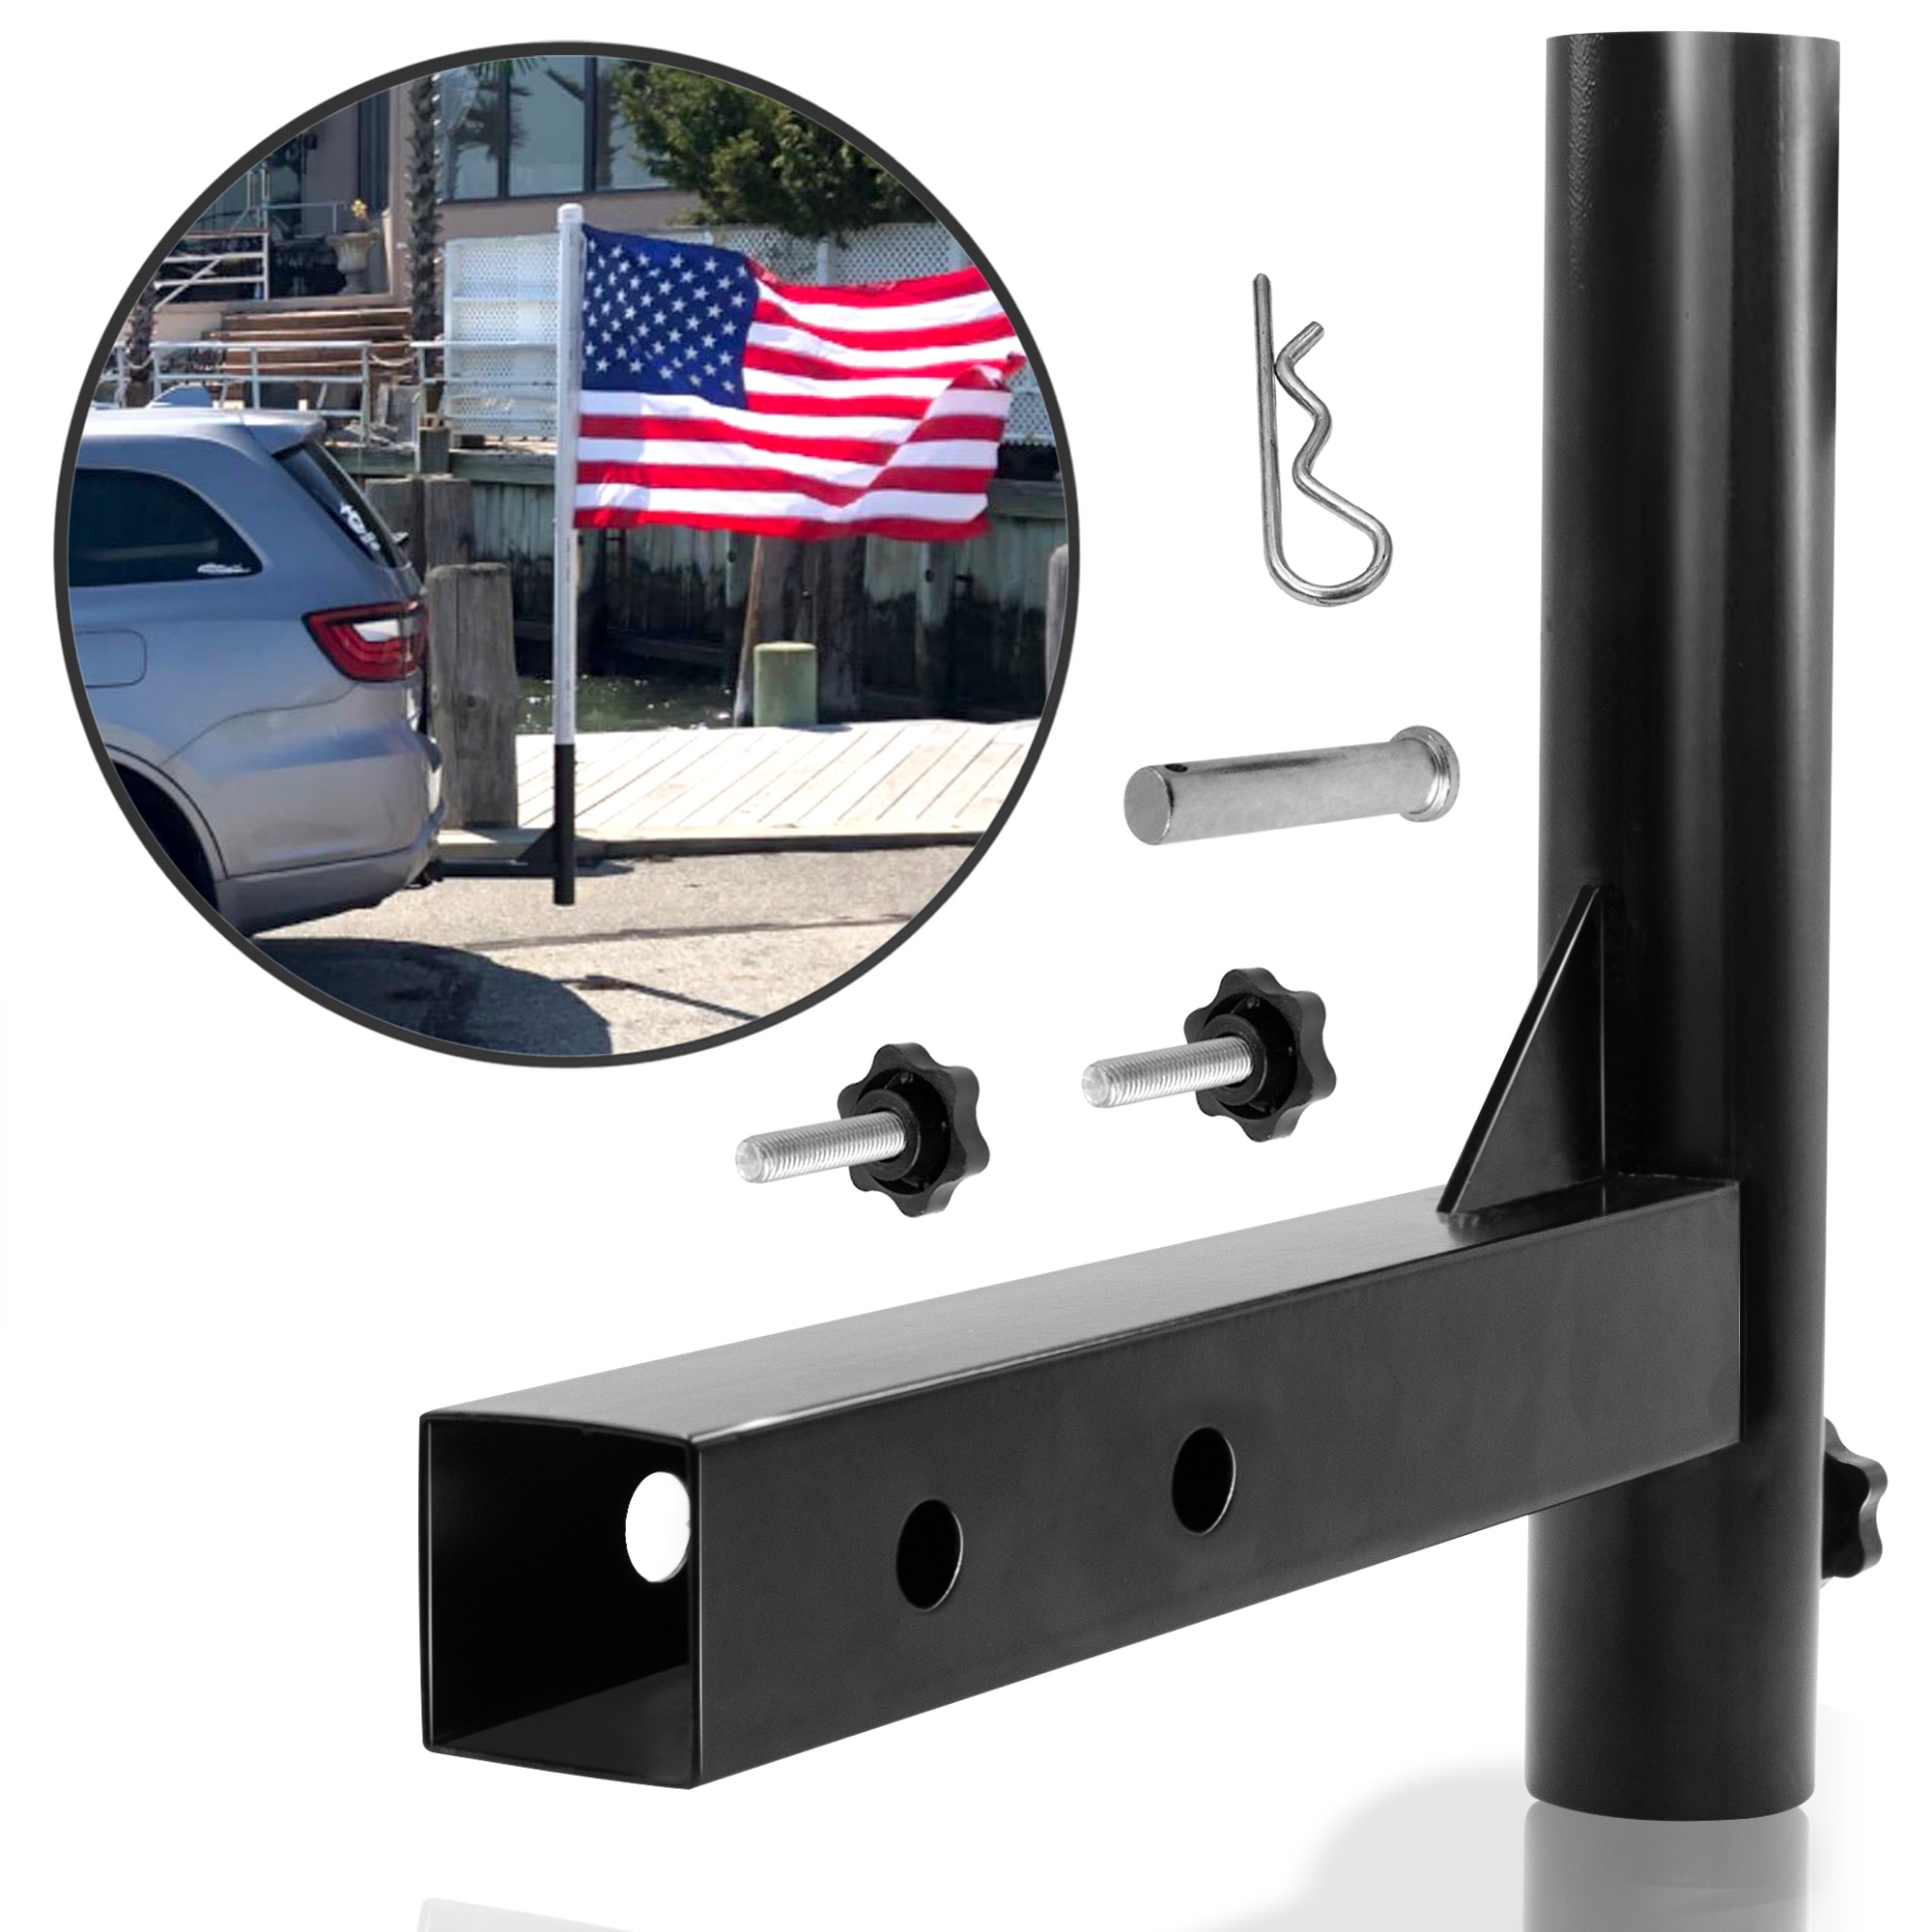 Anley Universal Car Hitch Mount Metal Flag Pole Holder in the Flag